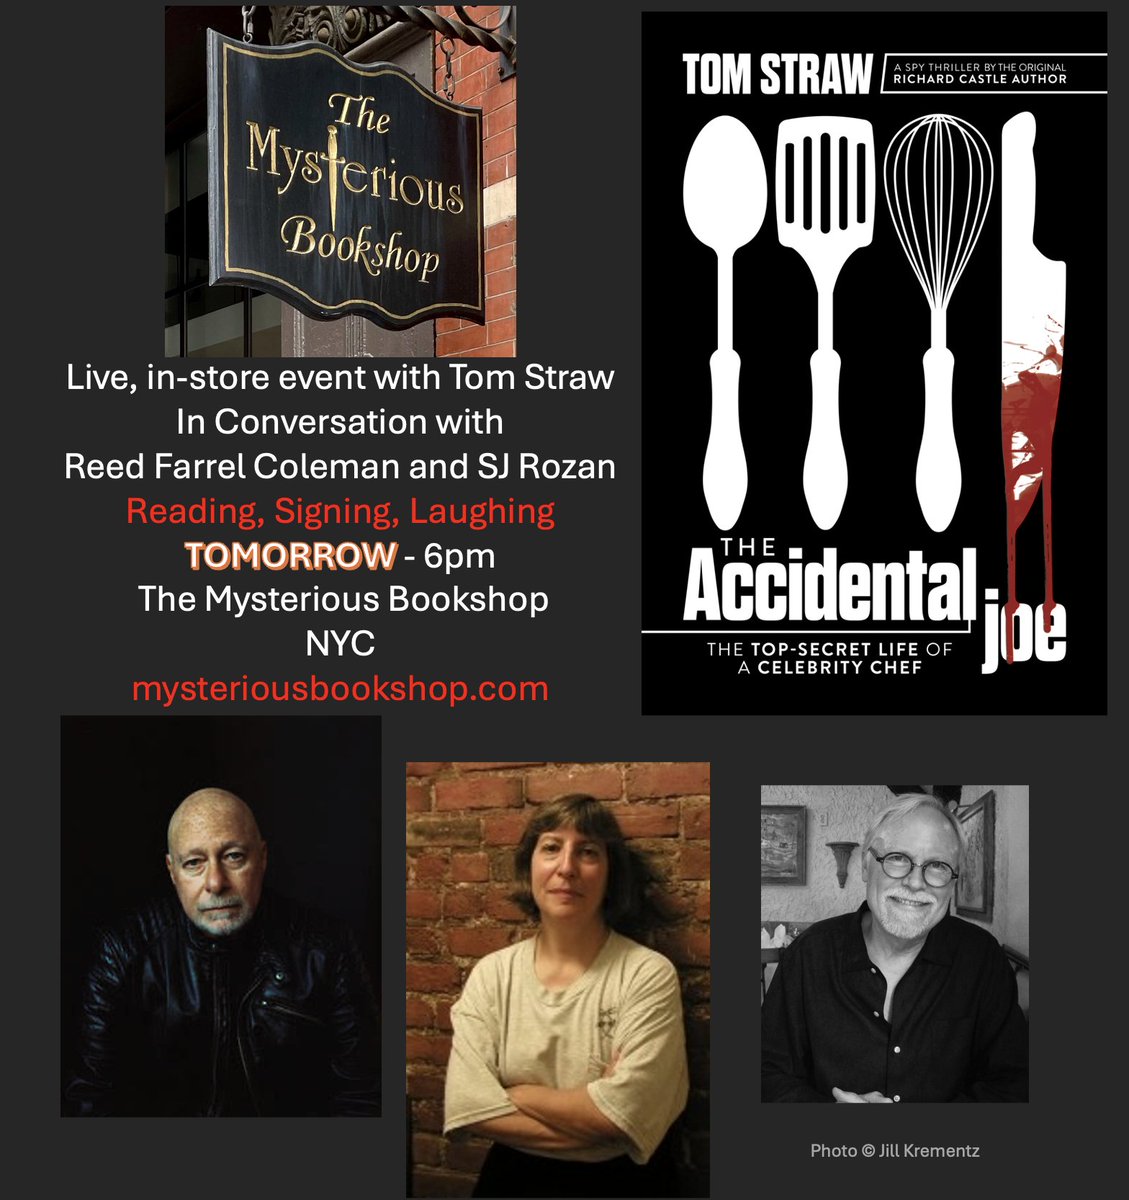 Tomorrow night, come spend 60 New York Minutes at @TheMysterious celebrating the launch of my spy thriller THE ACCIDENTAL JOE. With @ReedFColeman & @SJRozan keeping me on the ropes, it promises to be a don't-miss event. Here's the address and other info: mysteriousbookshop.com/pages/about-us